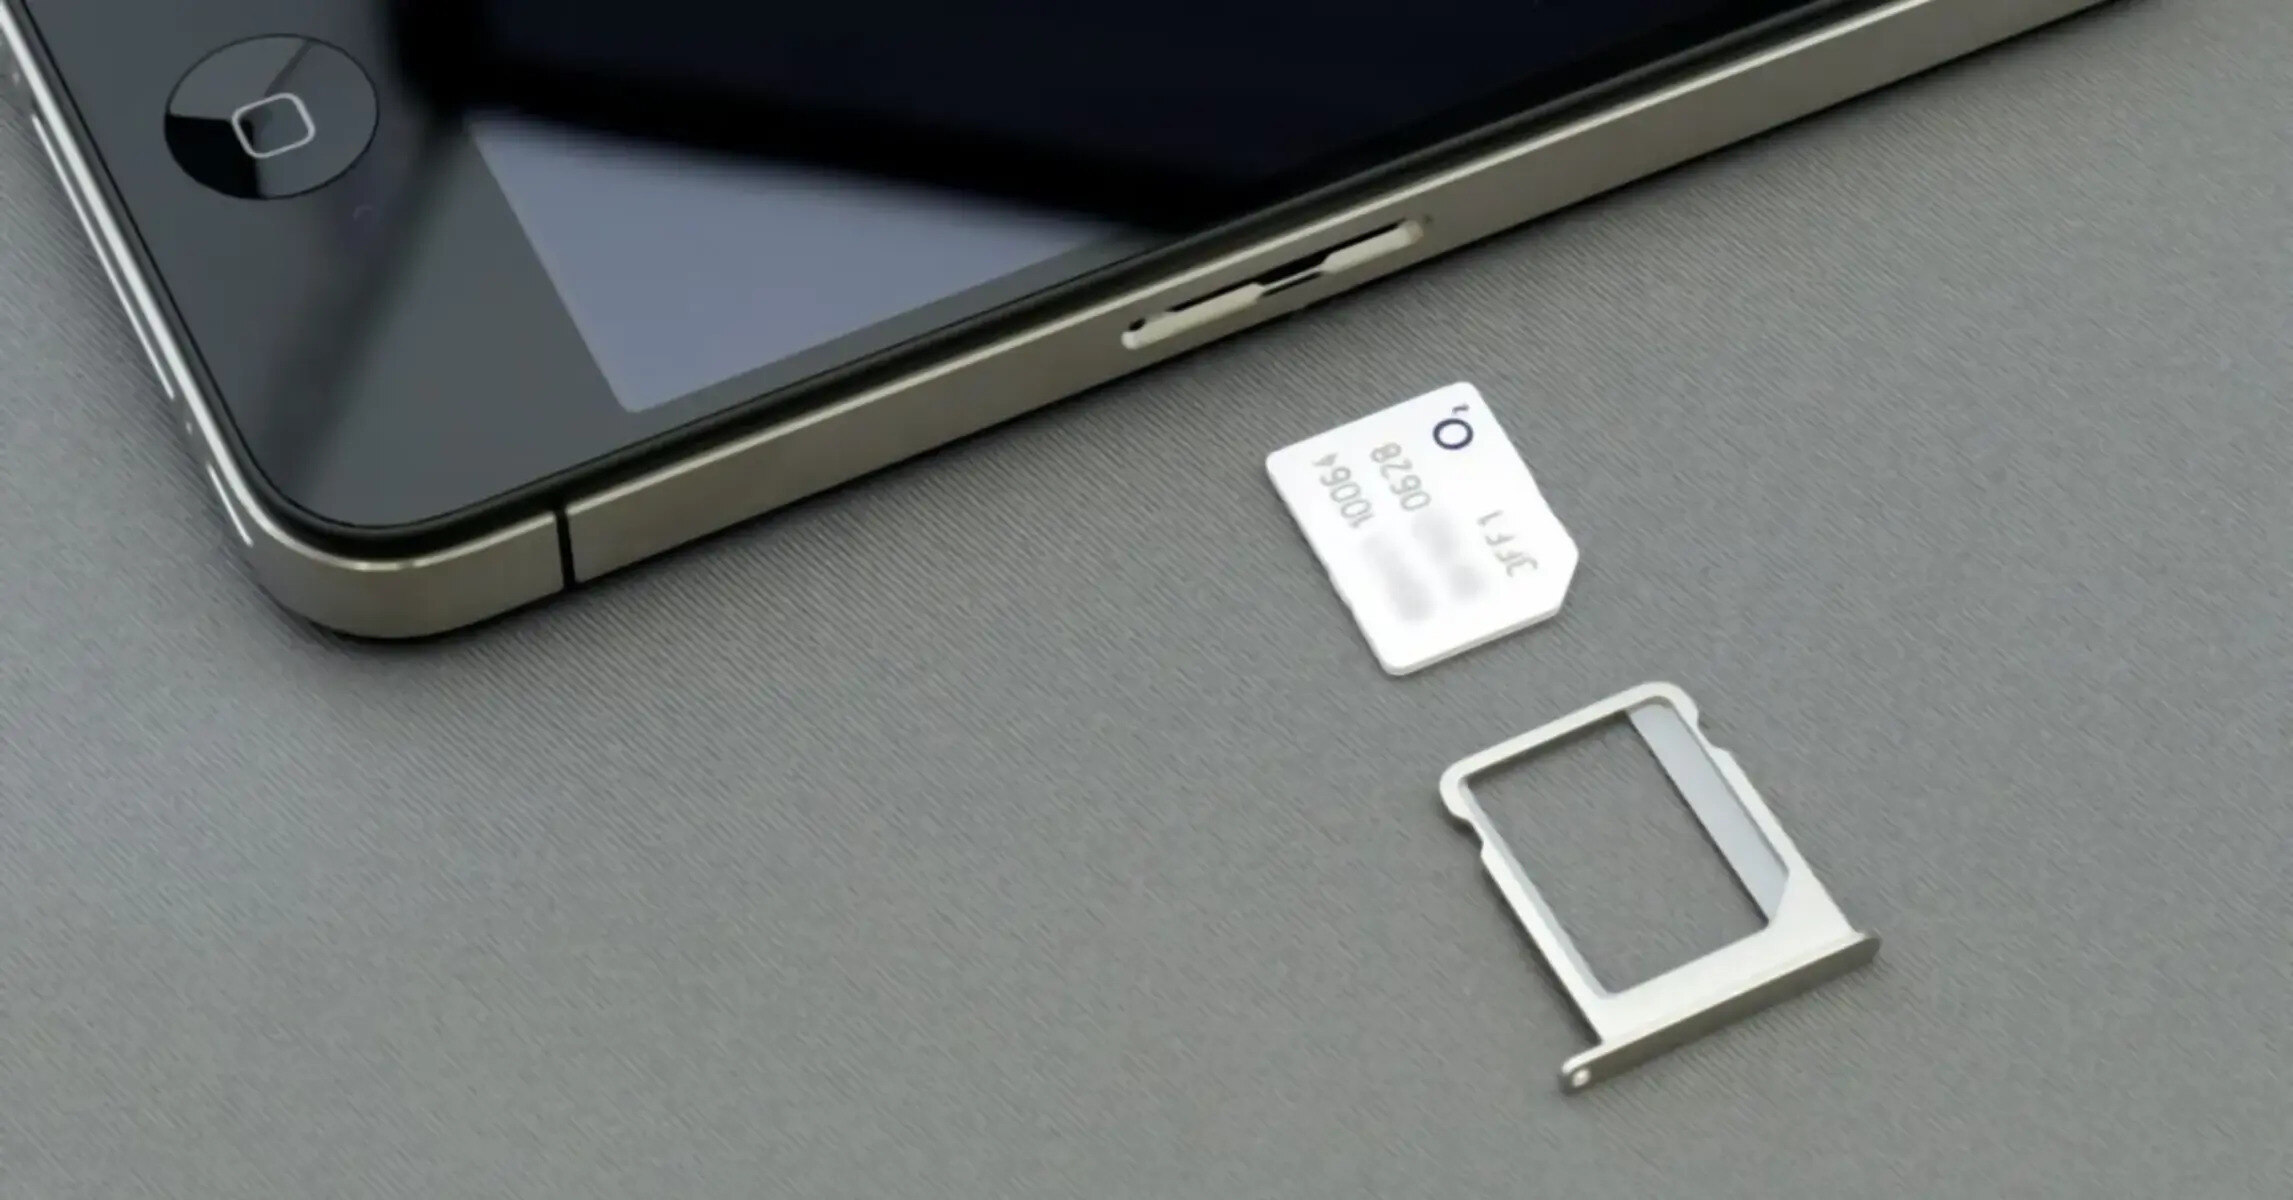 Removing The SIM Card From An IPhone: Step-by-Step Guide